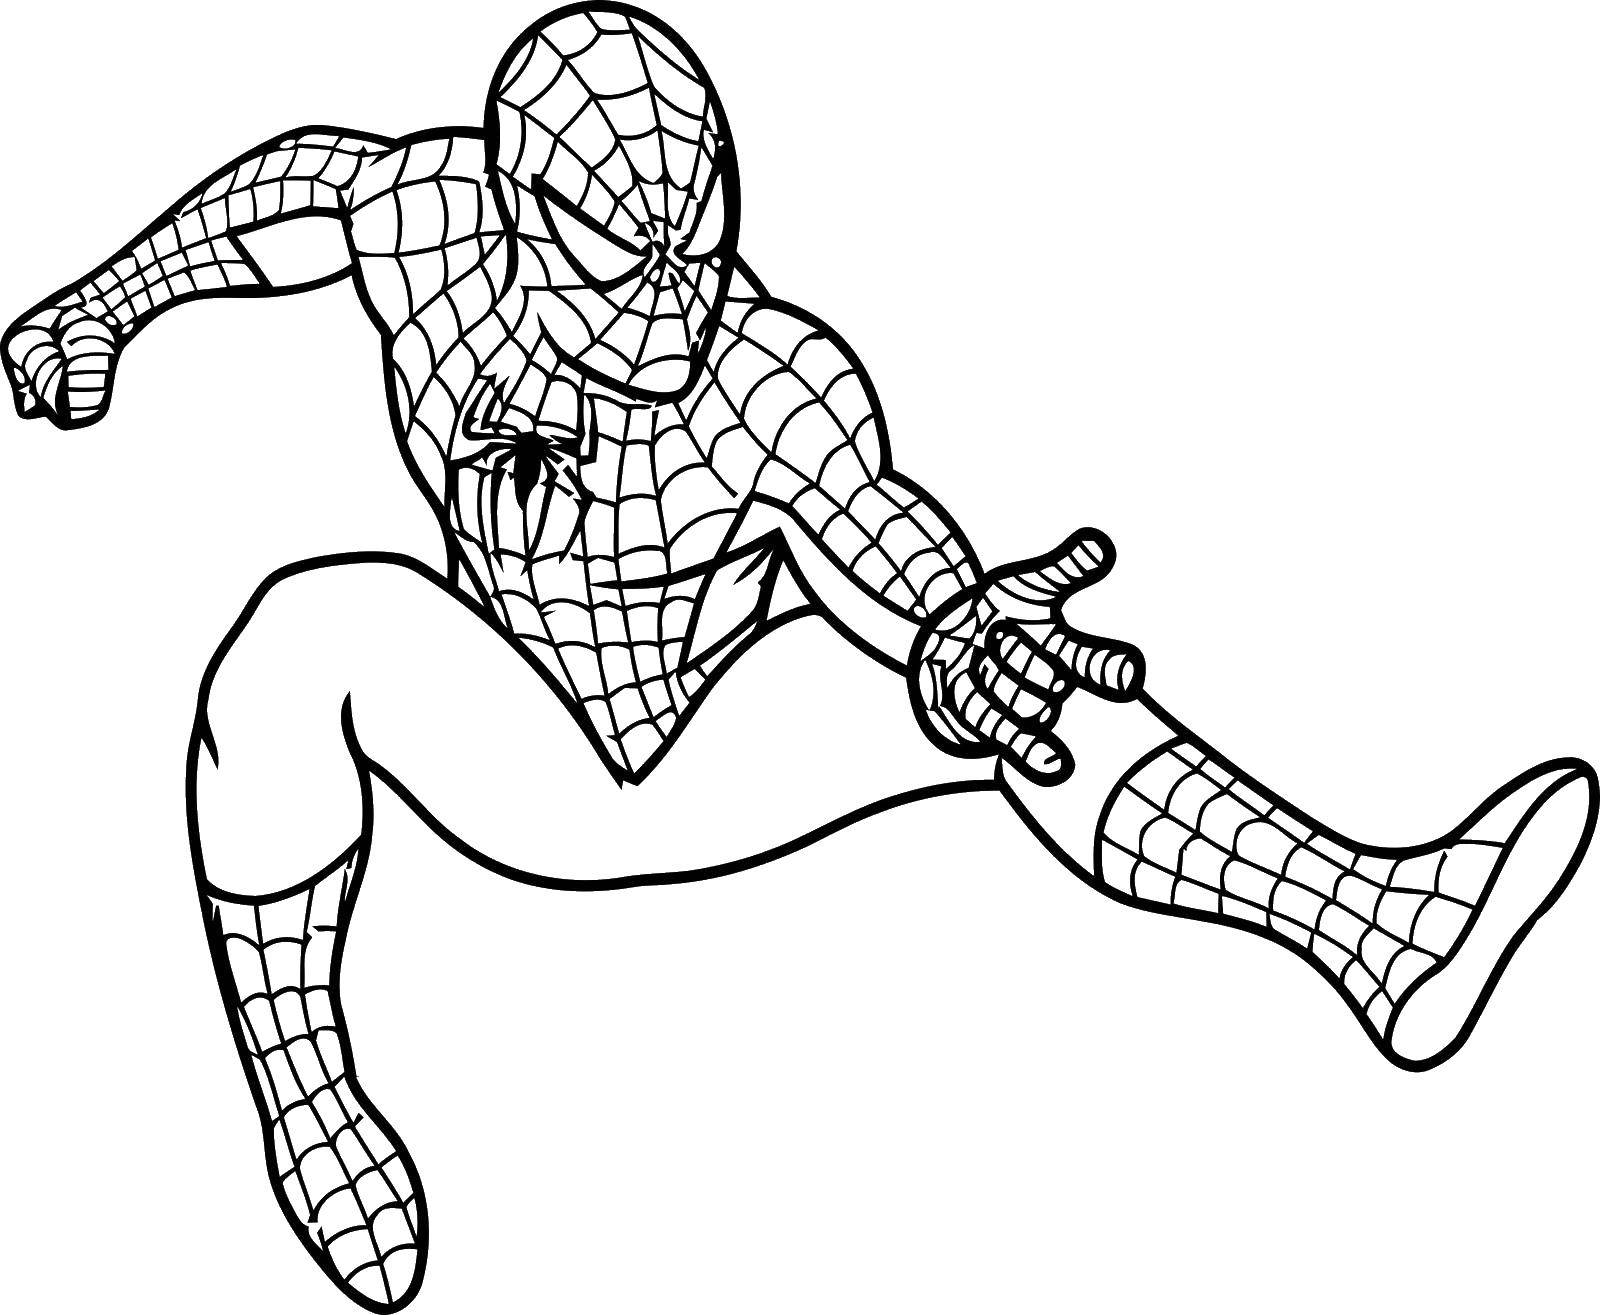 Coloring Spider-man. Category spider man. Tags:  film, cartoon, Spiderman, Spiderman.